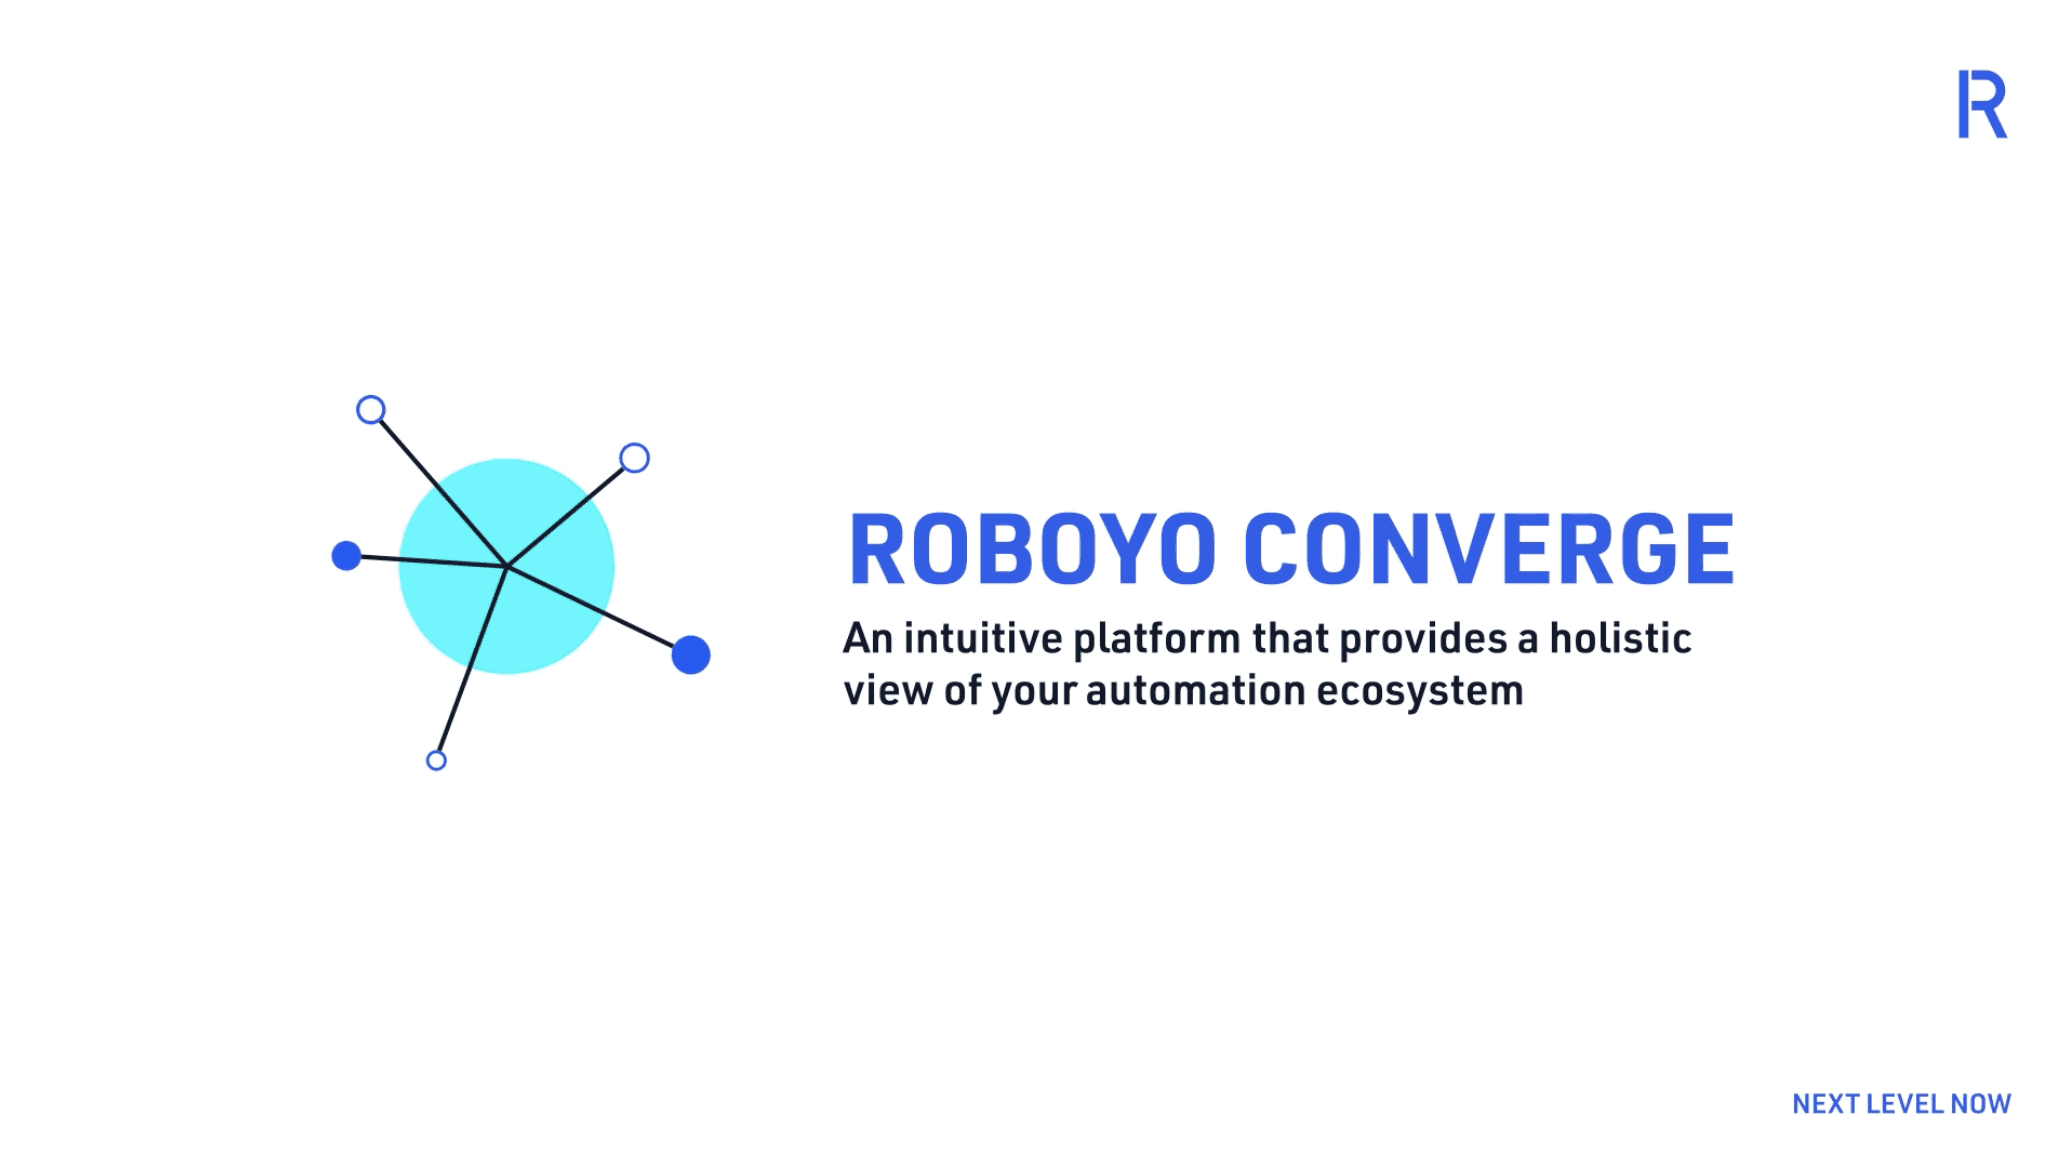 Roboyo Converge – End-to-end automation lifecycle platform